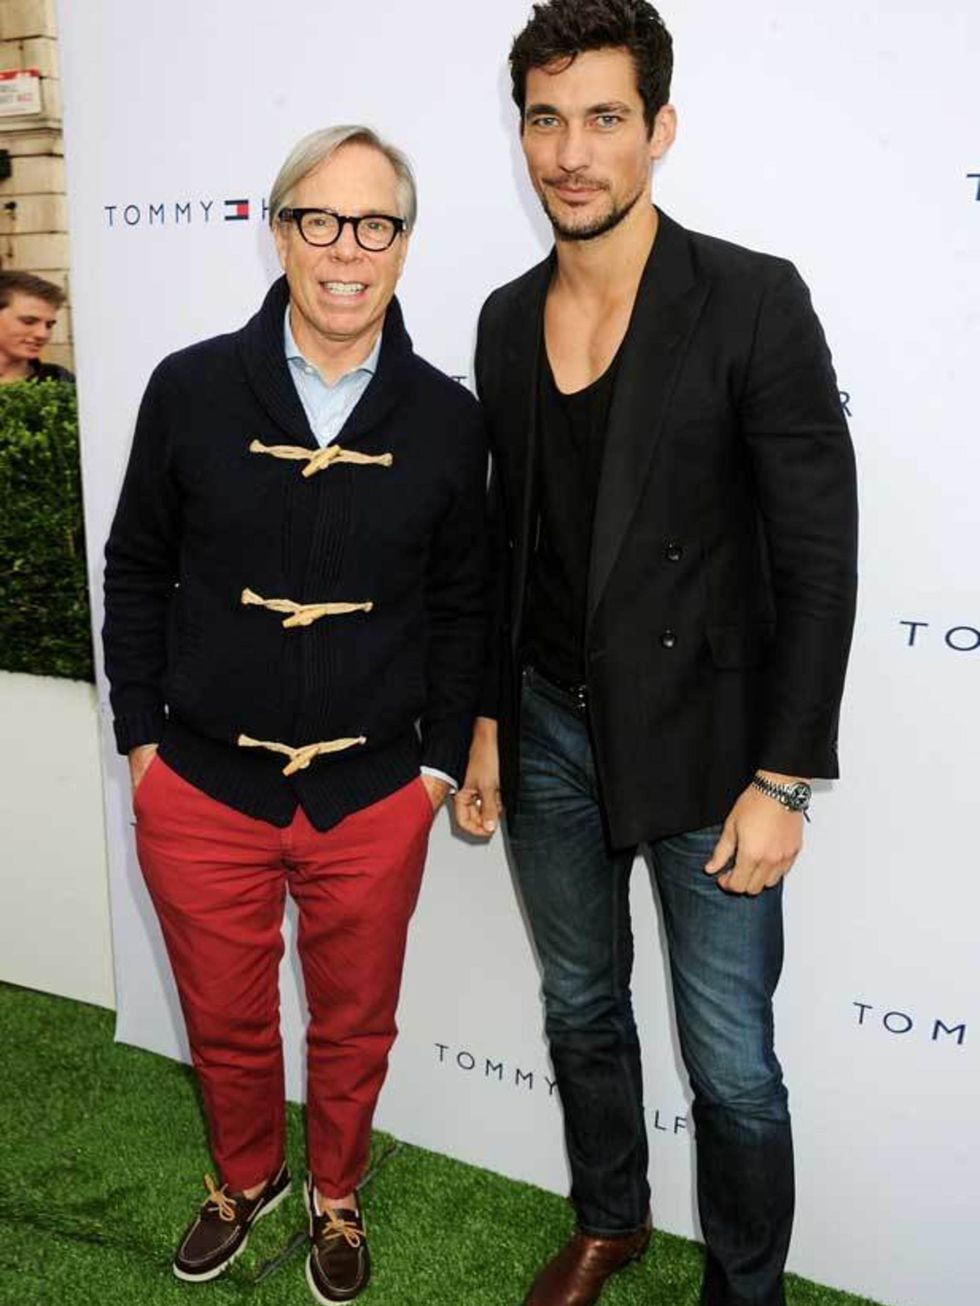 <p><a href="http://www.elleuk.com/catwalk/collections/tommy-hilfiger/autumn-winter-2011/review">Tommy Hilfiger</a> &amp; model <a href="http://www.elleuk.com/content/search?SearchText=david+gandy&amp;SearchButton=Search">David Gandy</a> at the launch of T